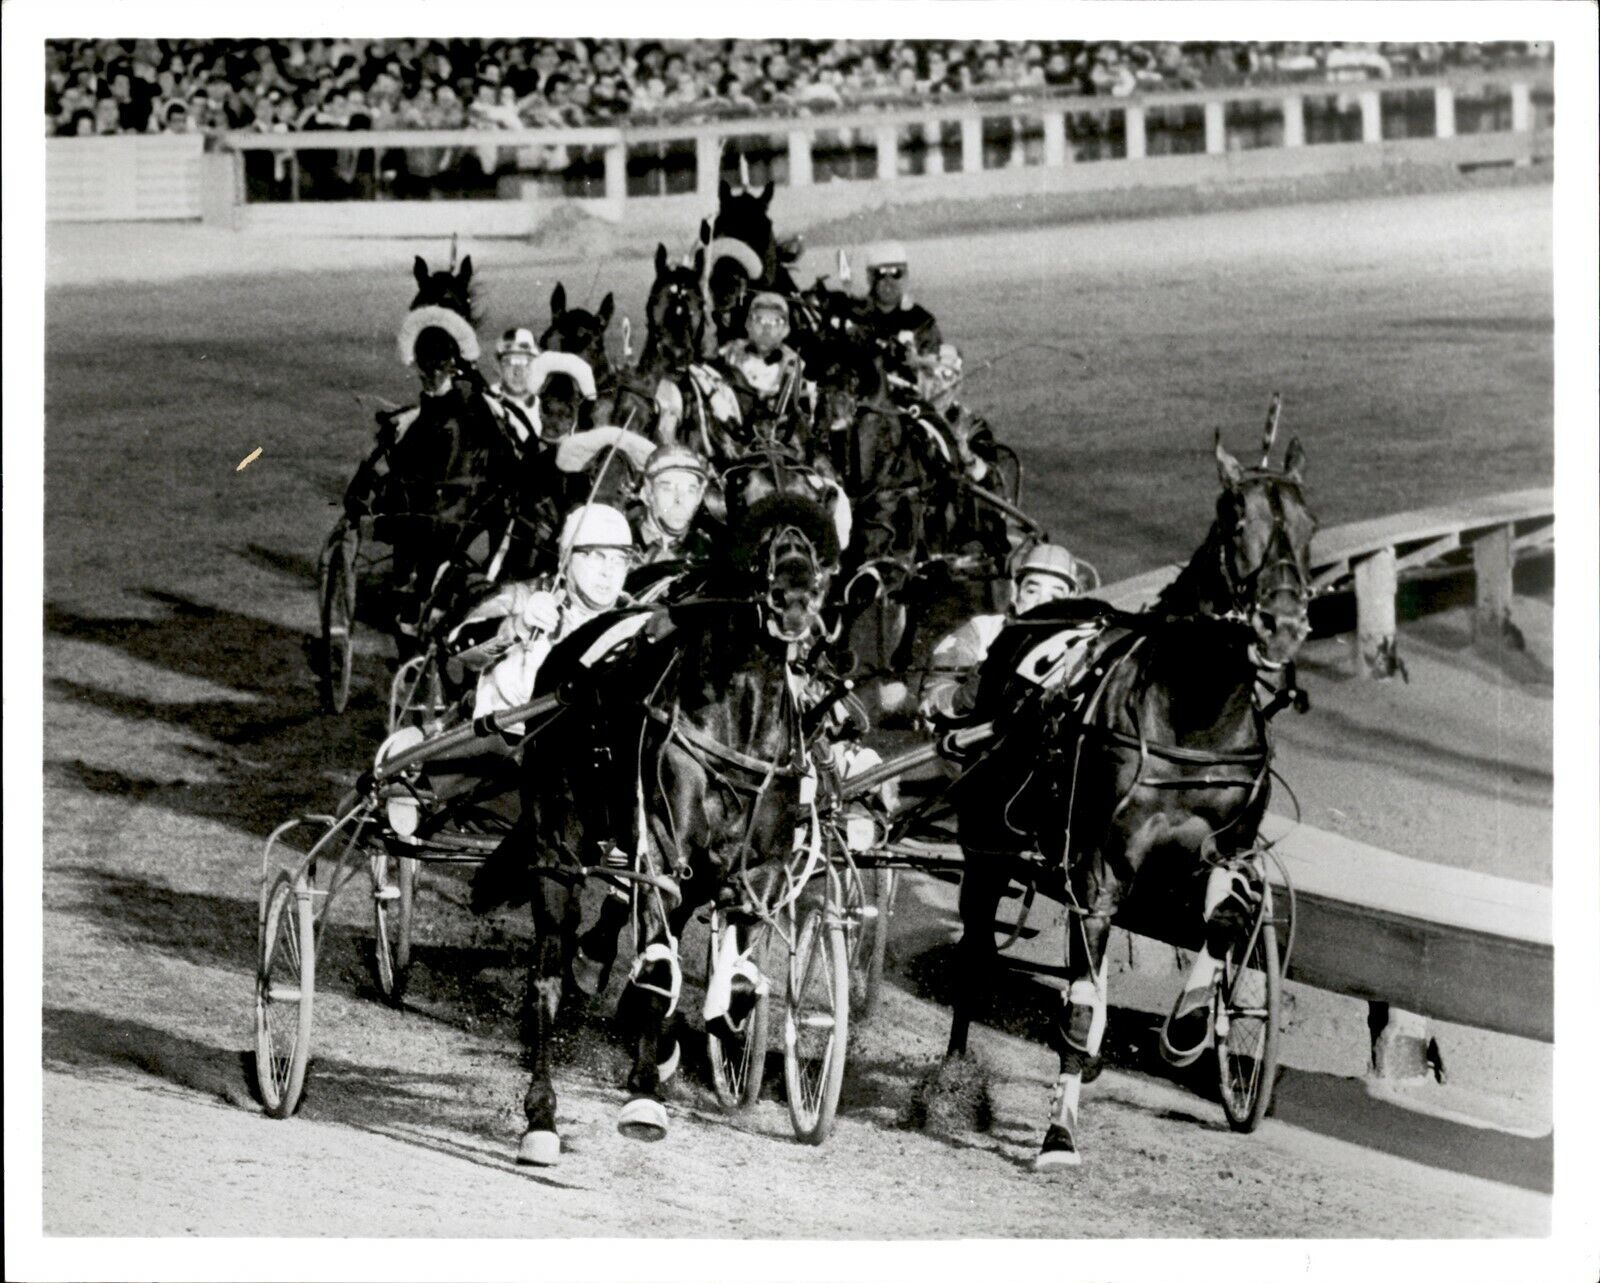 LV63 Orig Photo HARNESS HORSE RACING Speeding Animals Galloping on Track Action